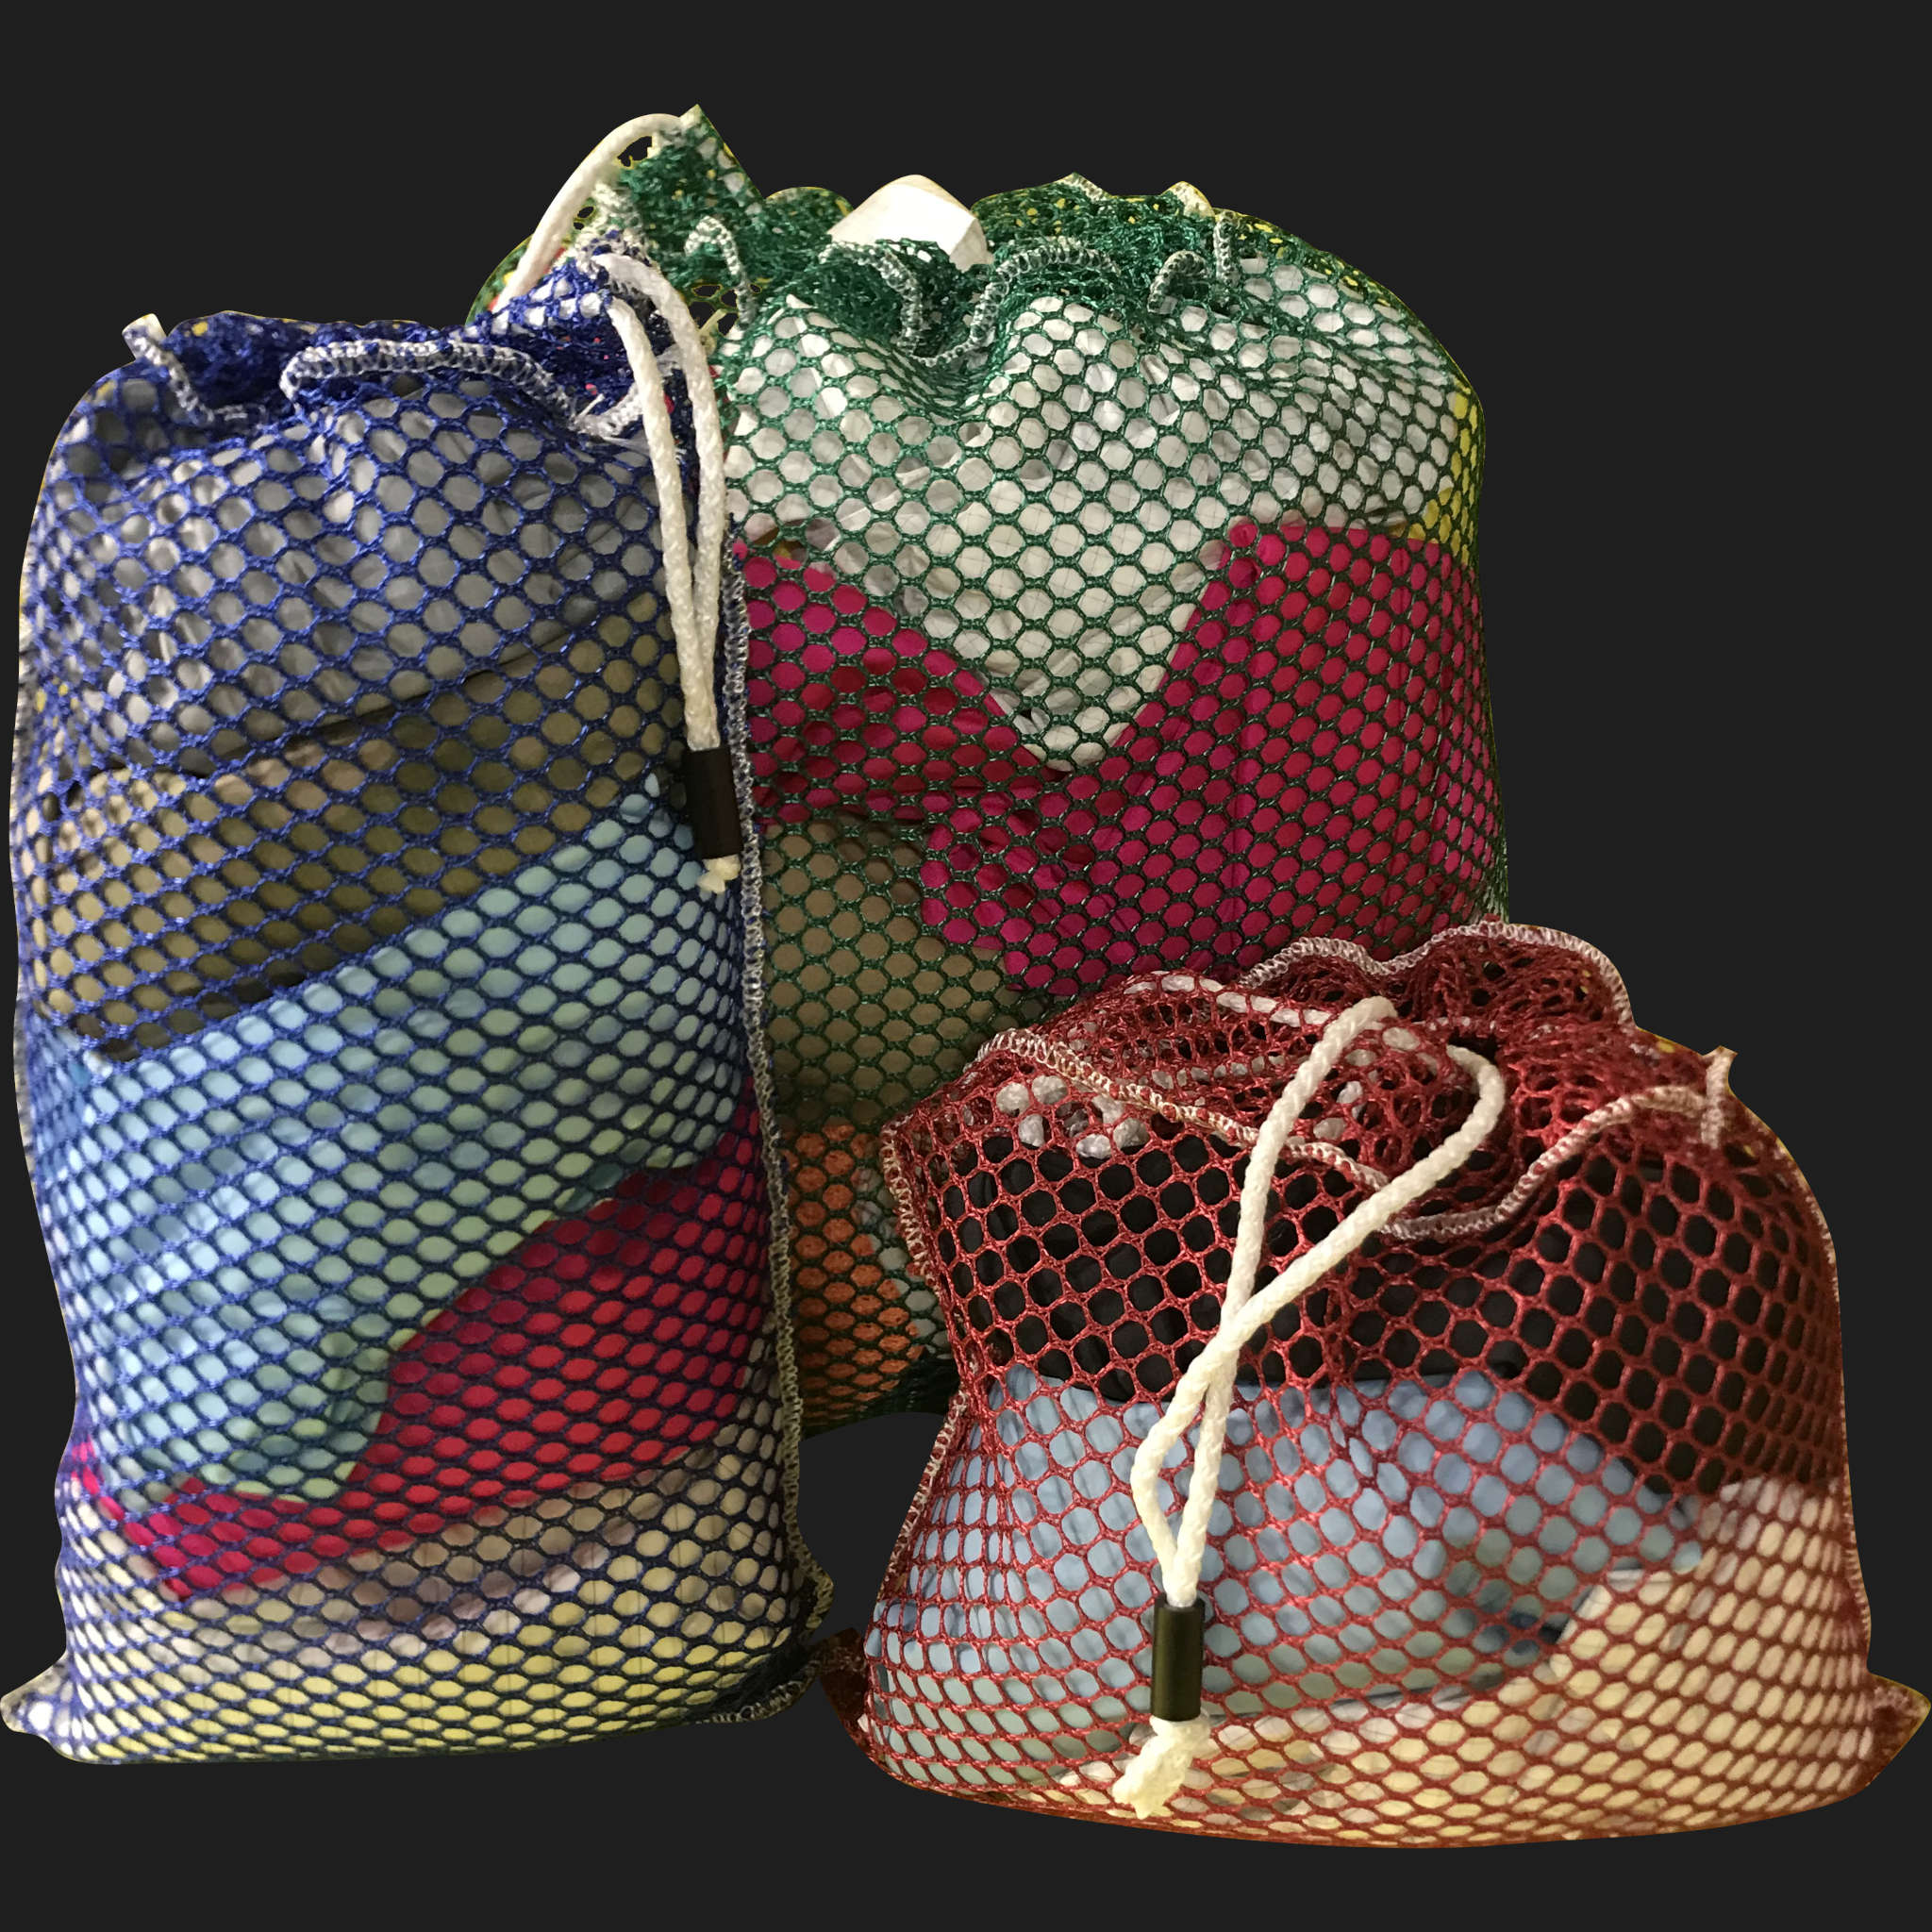 18" x 24" Customized Mesh-Net-Laundry Bags Heavy Duty with Cord and barrellock closure